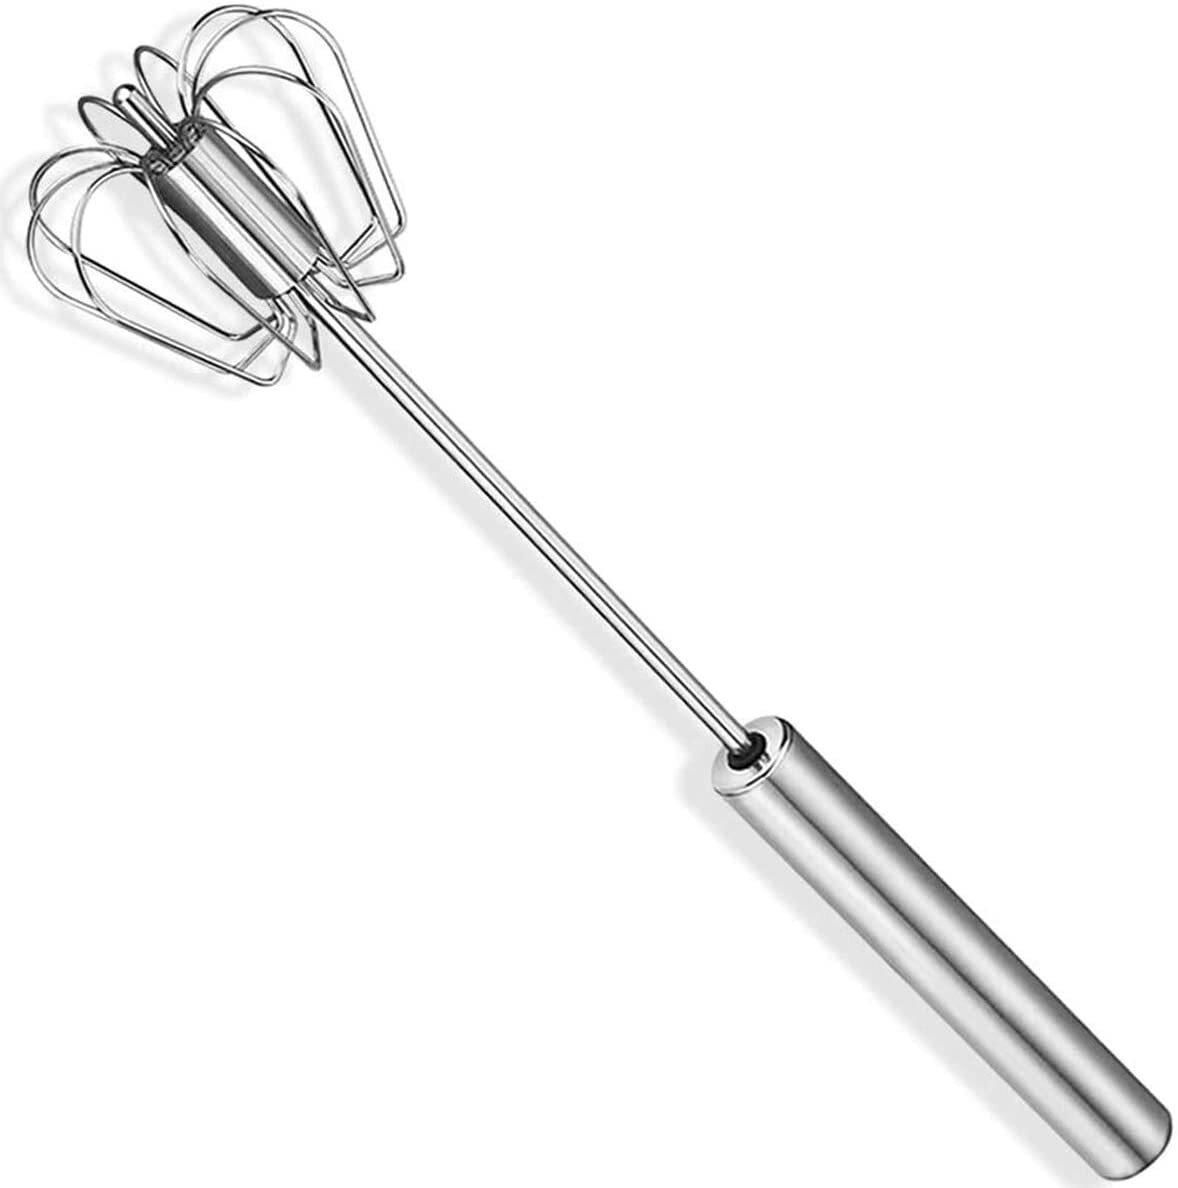 Stainless Steel Semi-Automatic Egg Whisk 12&rdquo;, Hand Push Egg Beater Mixer Blender for Kitchen Cooking